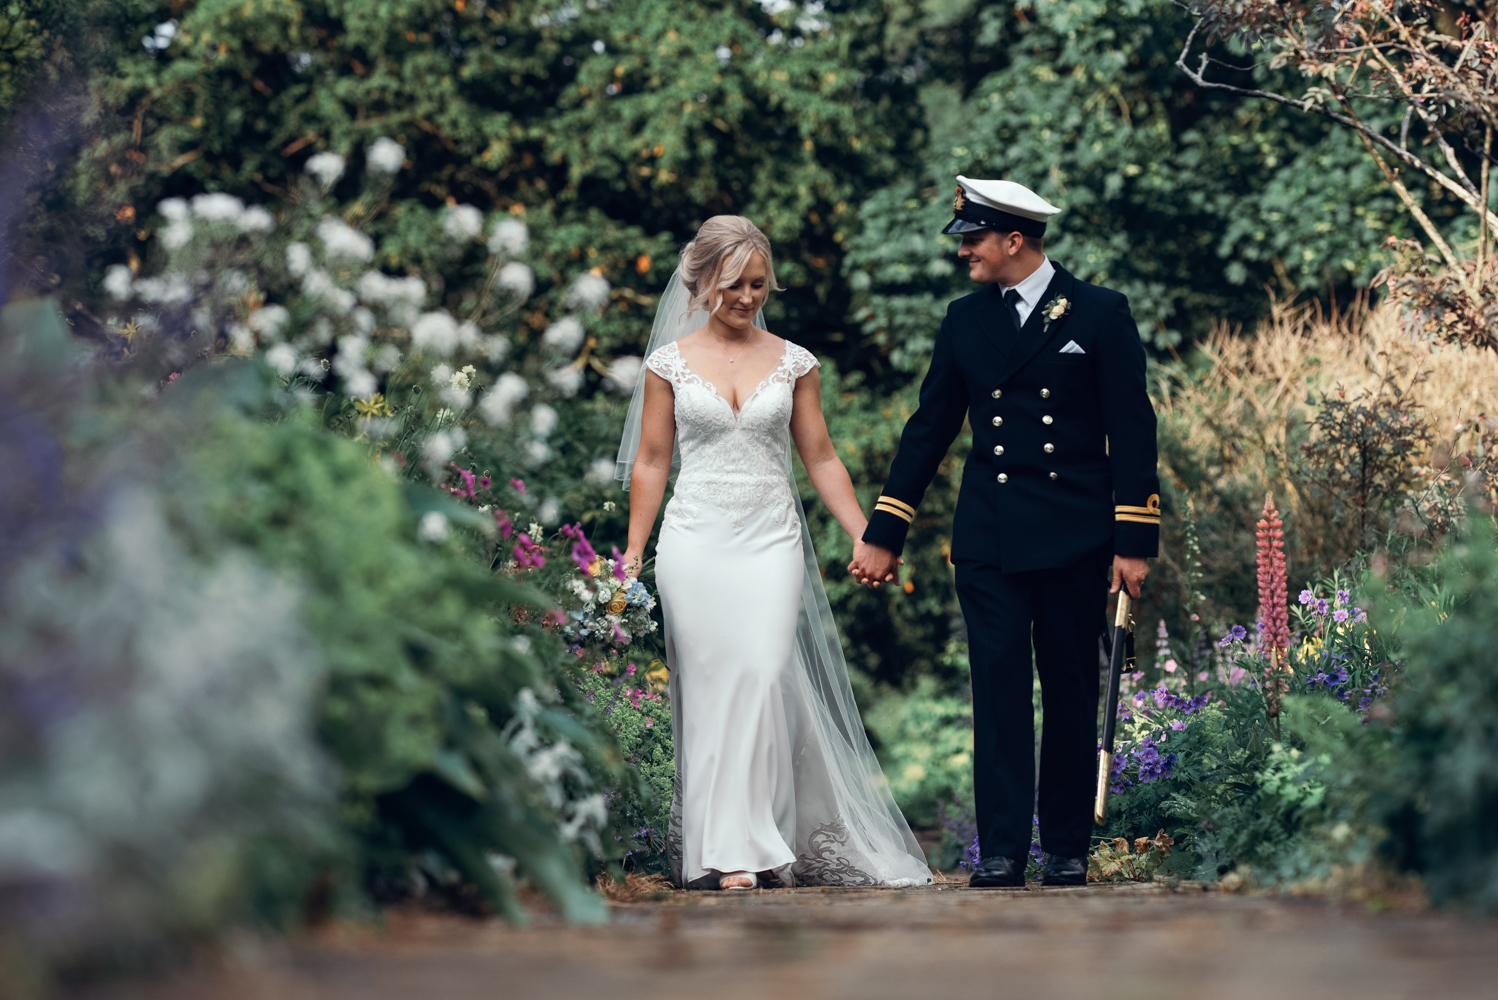 The bride and groom taking a relaxing walk through the amazing gardens at Askham Hall